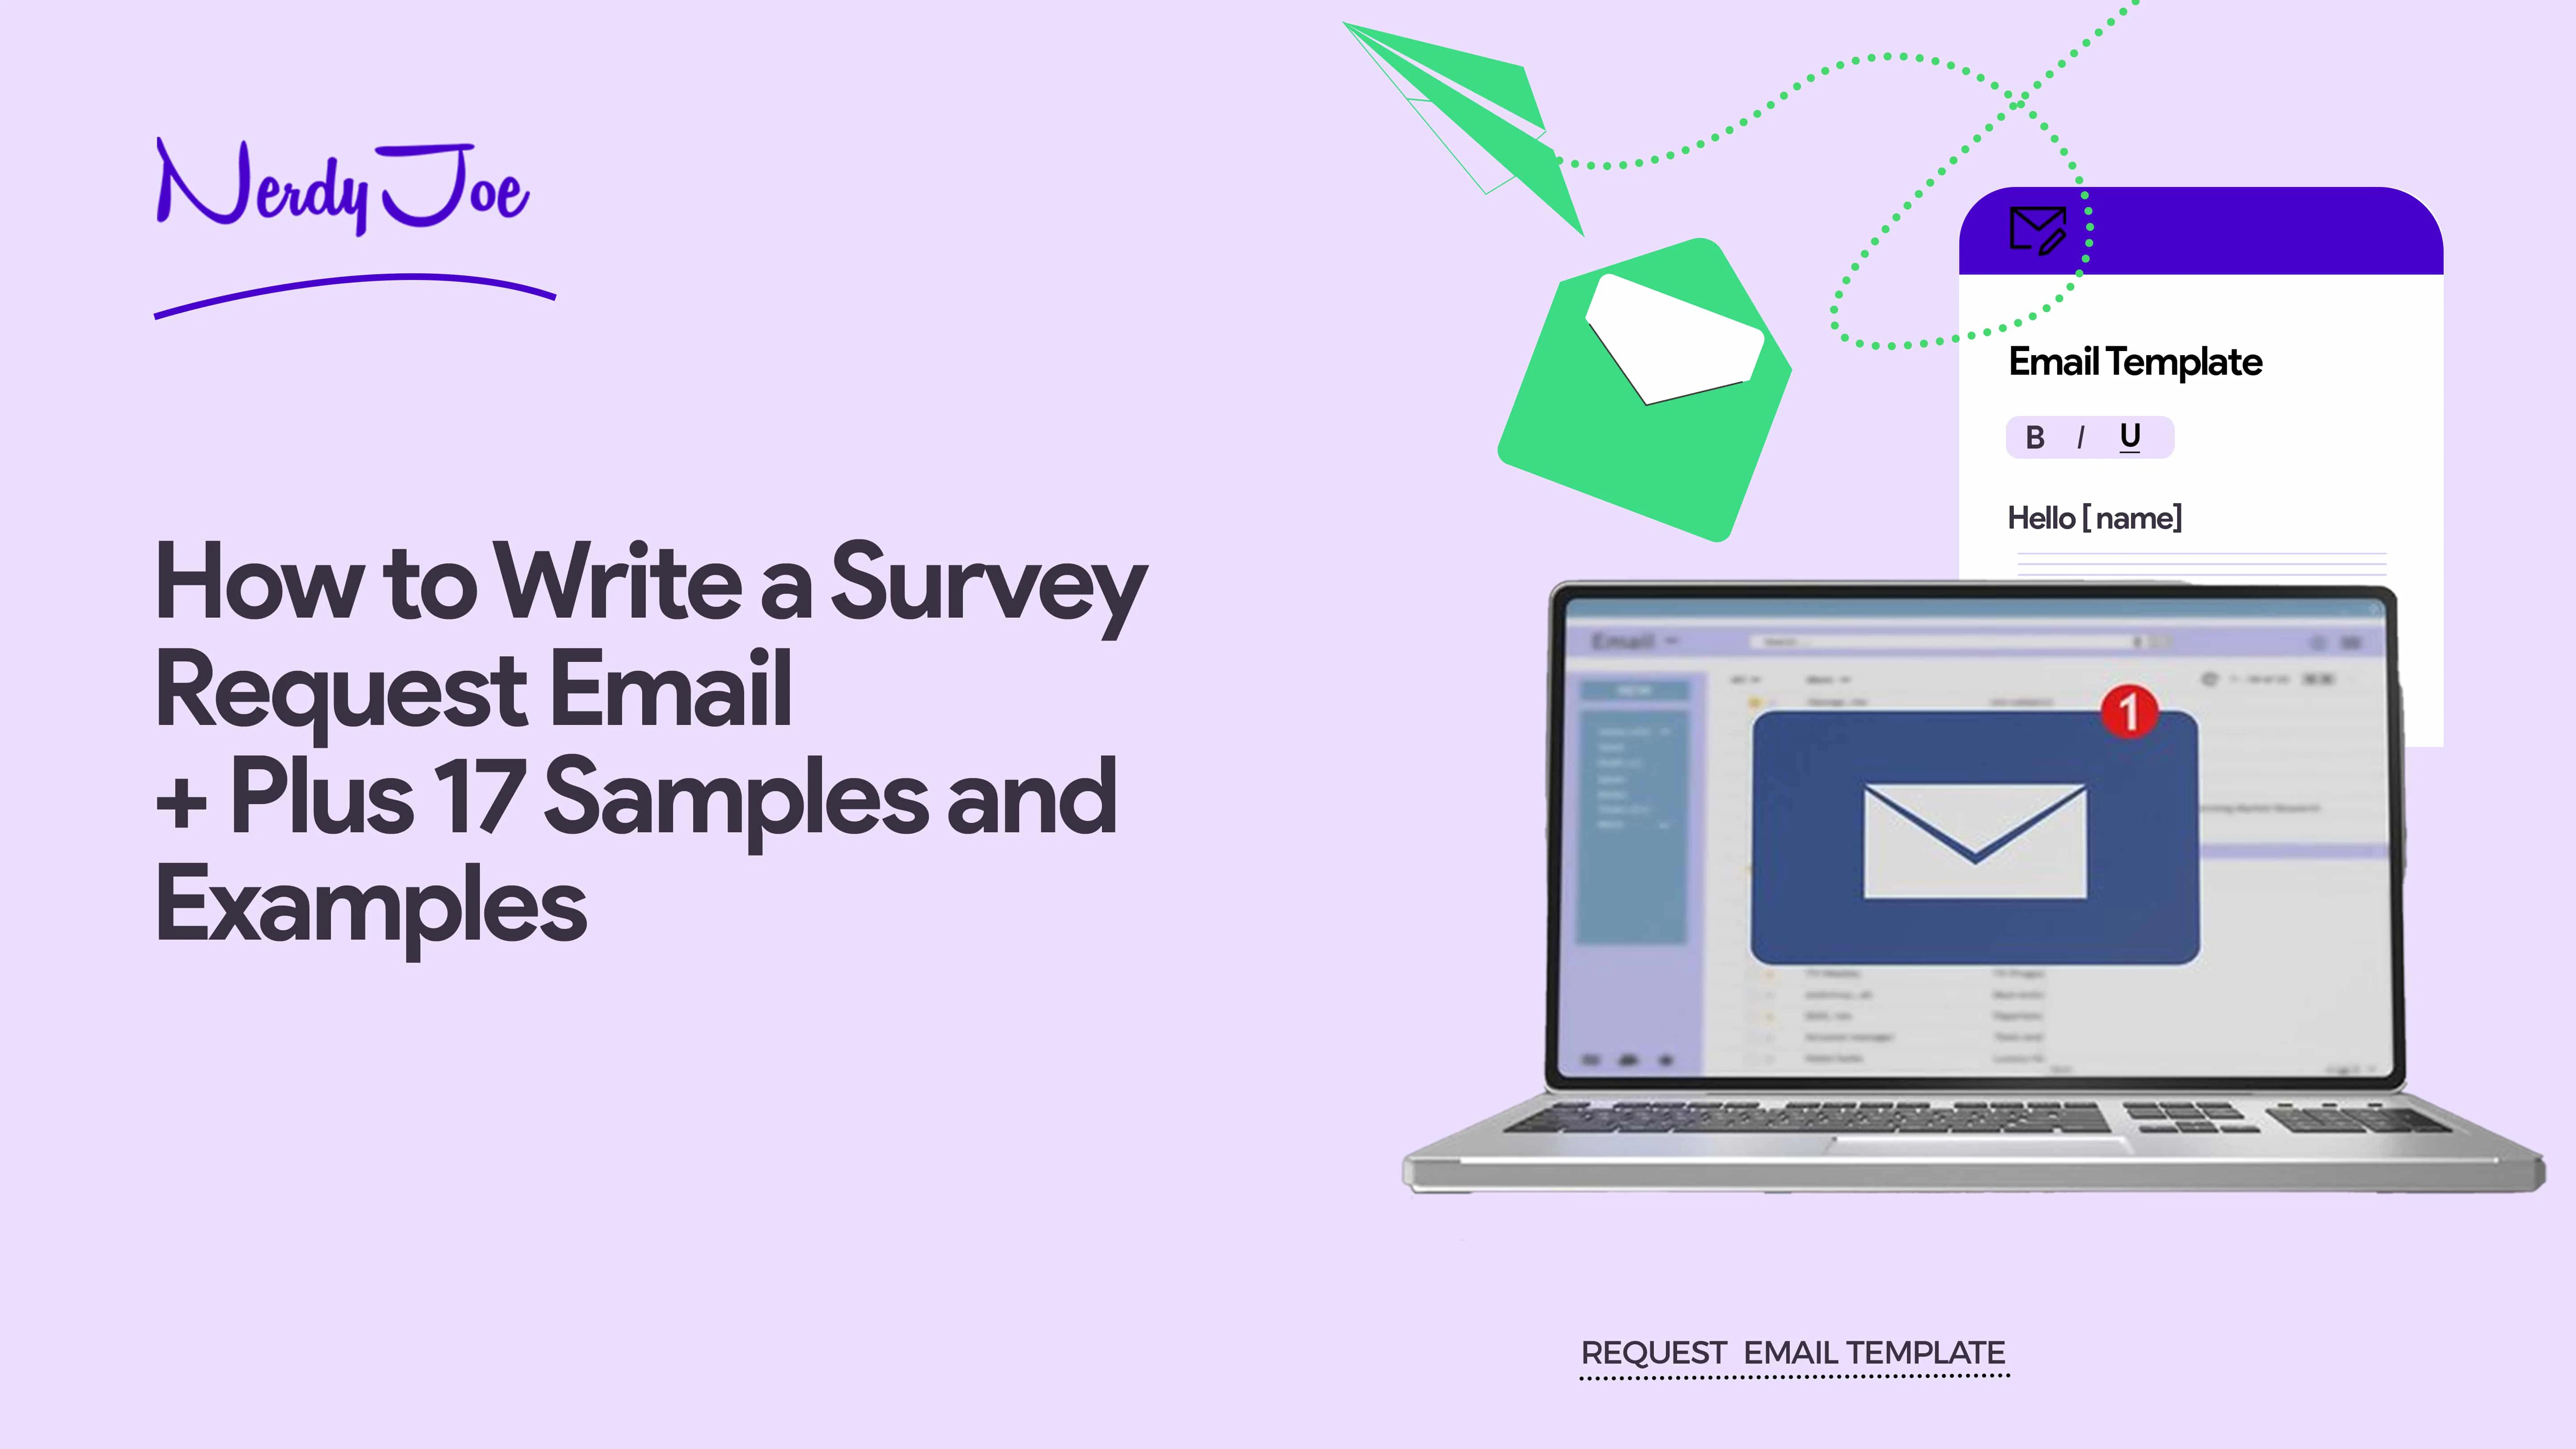 How to Write a Survey Request Email With 17 Samples From Experts